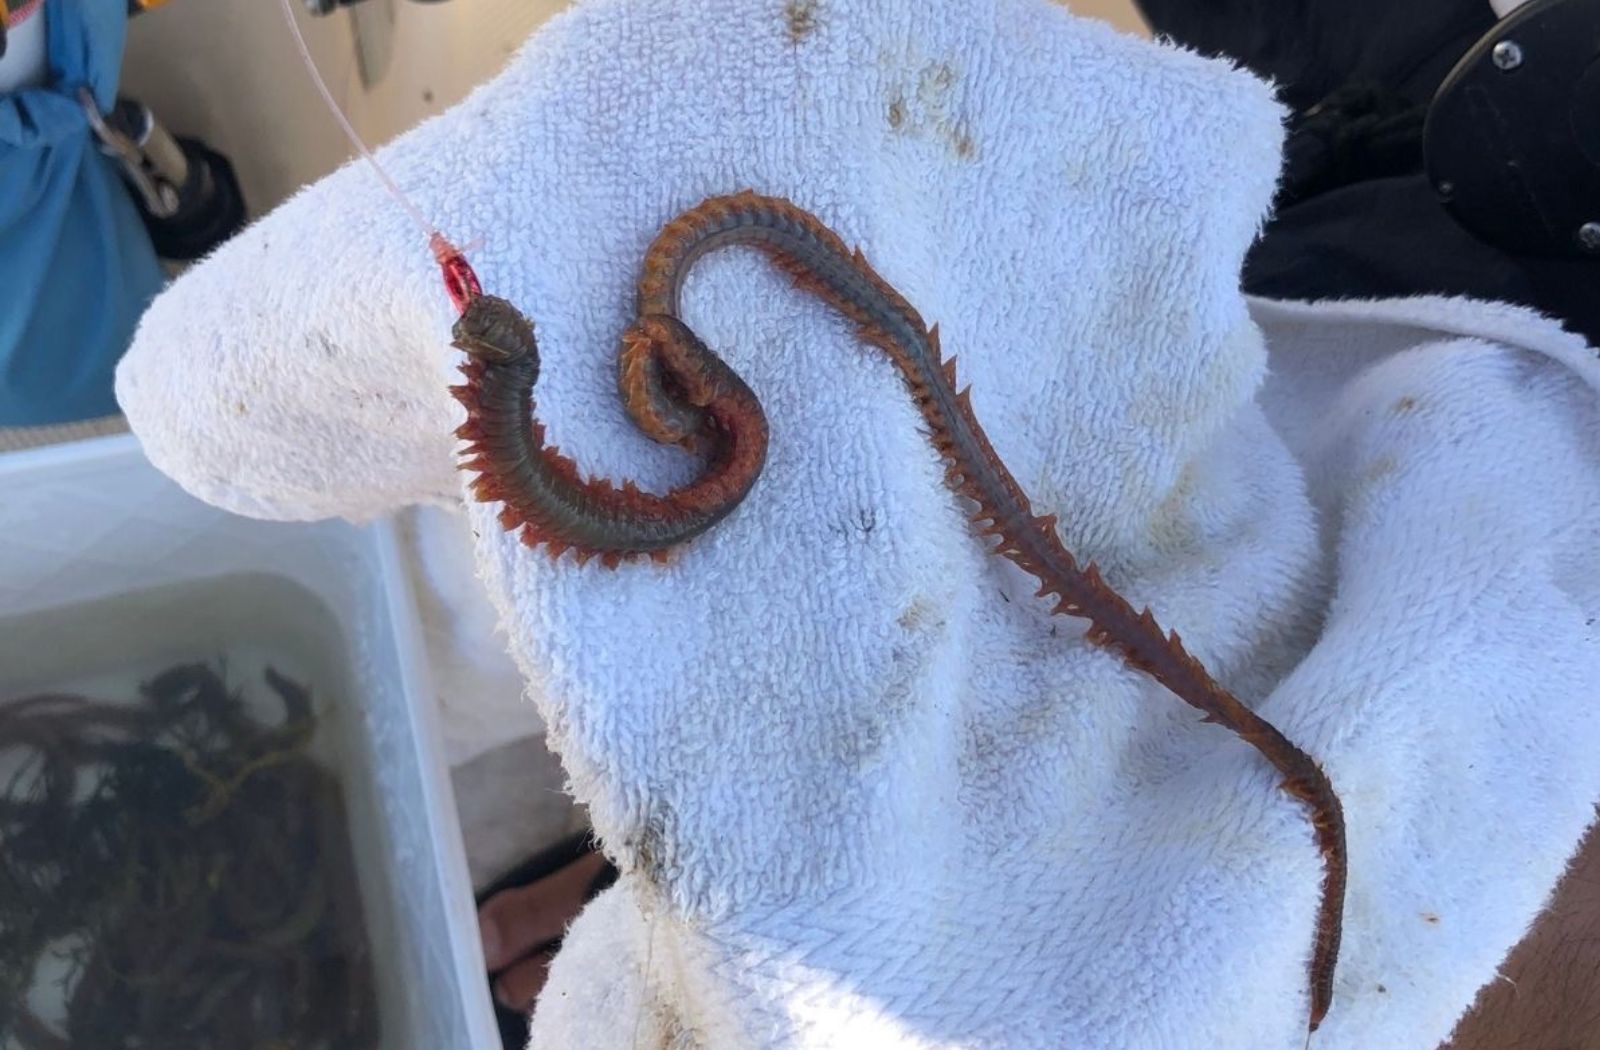 A Large Sandworm rigged on a circle hook displayed on a rag with a bucket full of more sandworms below